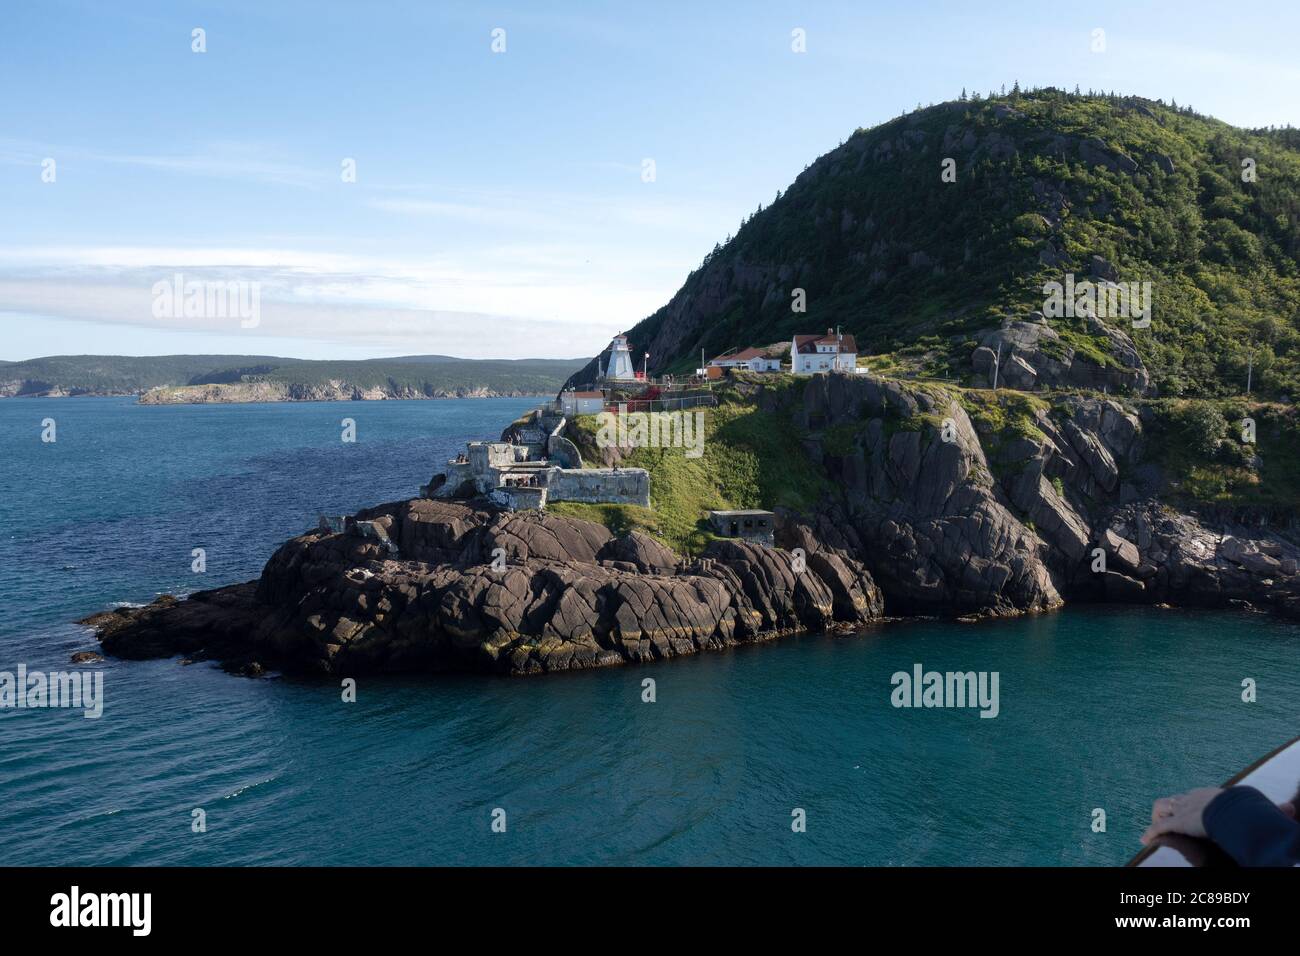 Fort Amherst And Lighthouse On The South Side Of The Narrows The Entrance To St John's Harbour Newfoundland Canada Stock Photo